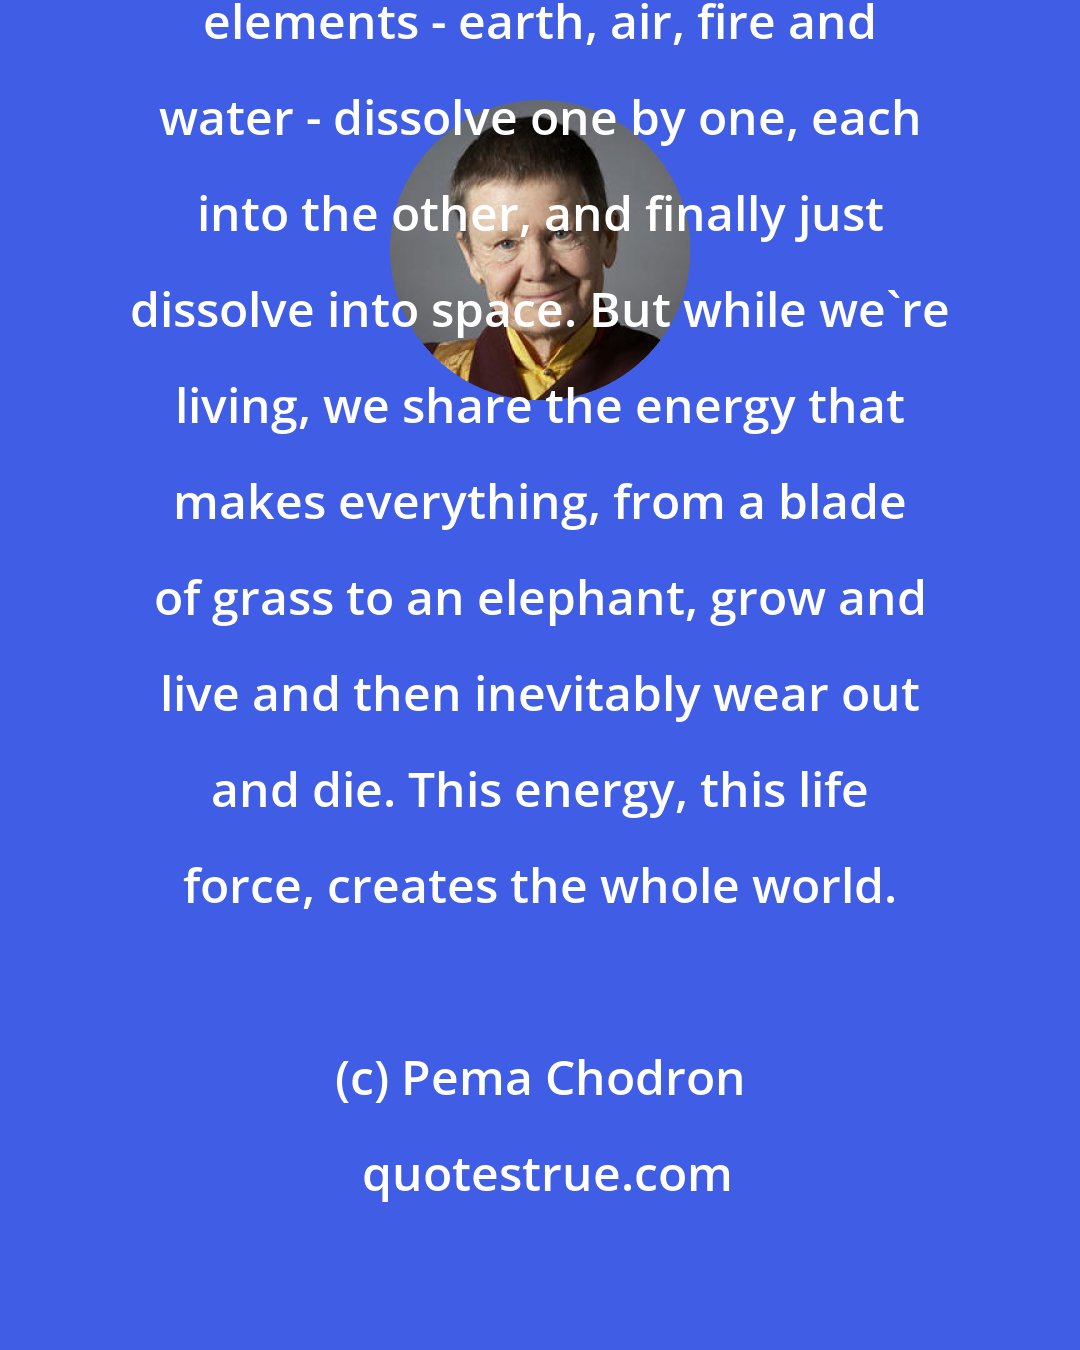 Pema Chodron: It's said that when we die, the four elements - earth, air, fire and water - dissolve one by one, each into the other, and finally just dissolve into space. But while we're living, we share the energy that makes everything, from a blade of grass to an elephant, grow and live and then inevitably wear out and die. This energy, this life force, creates the whole world.